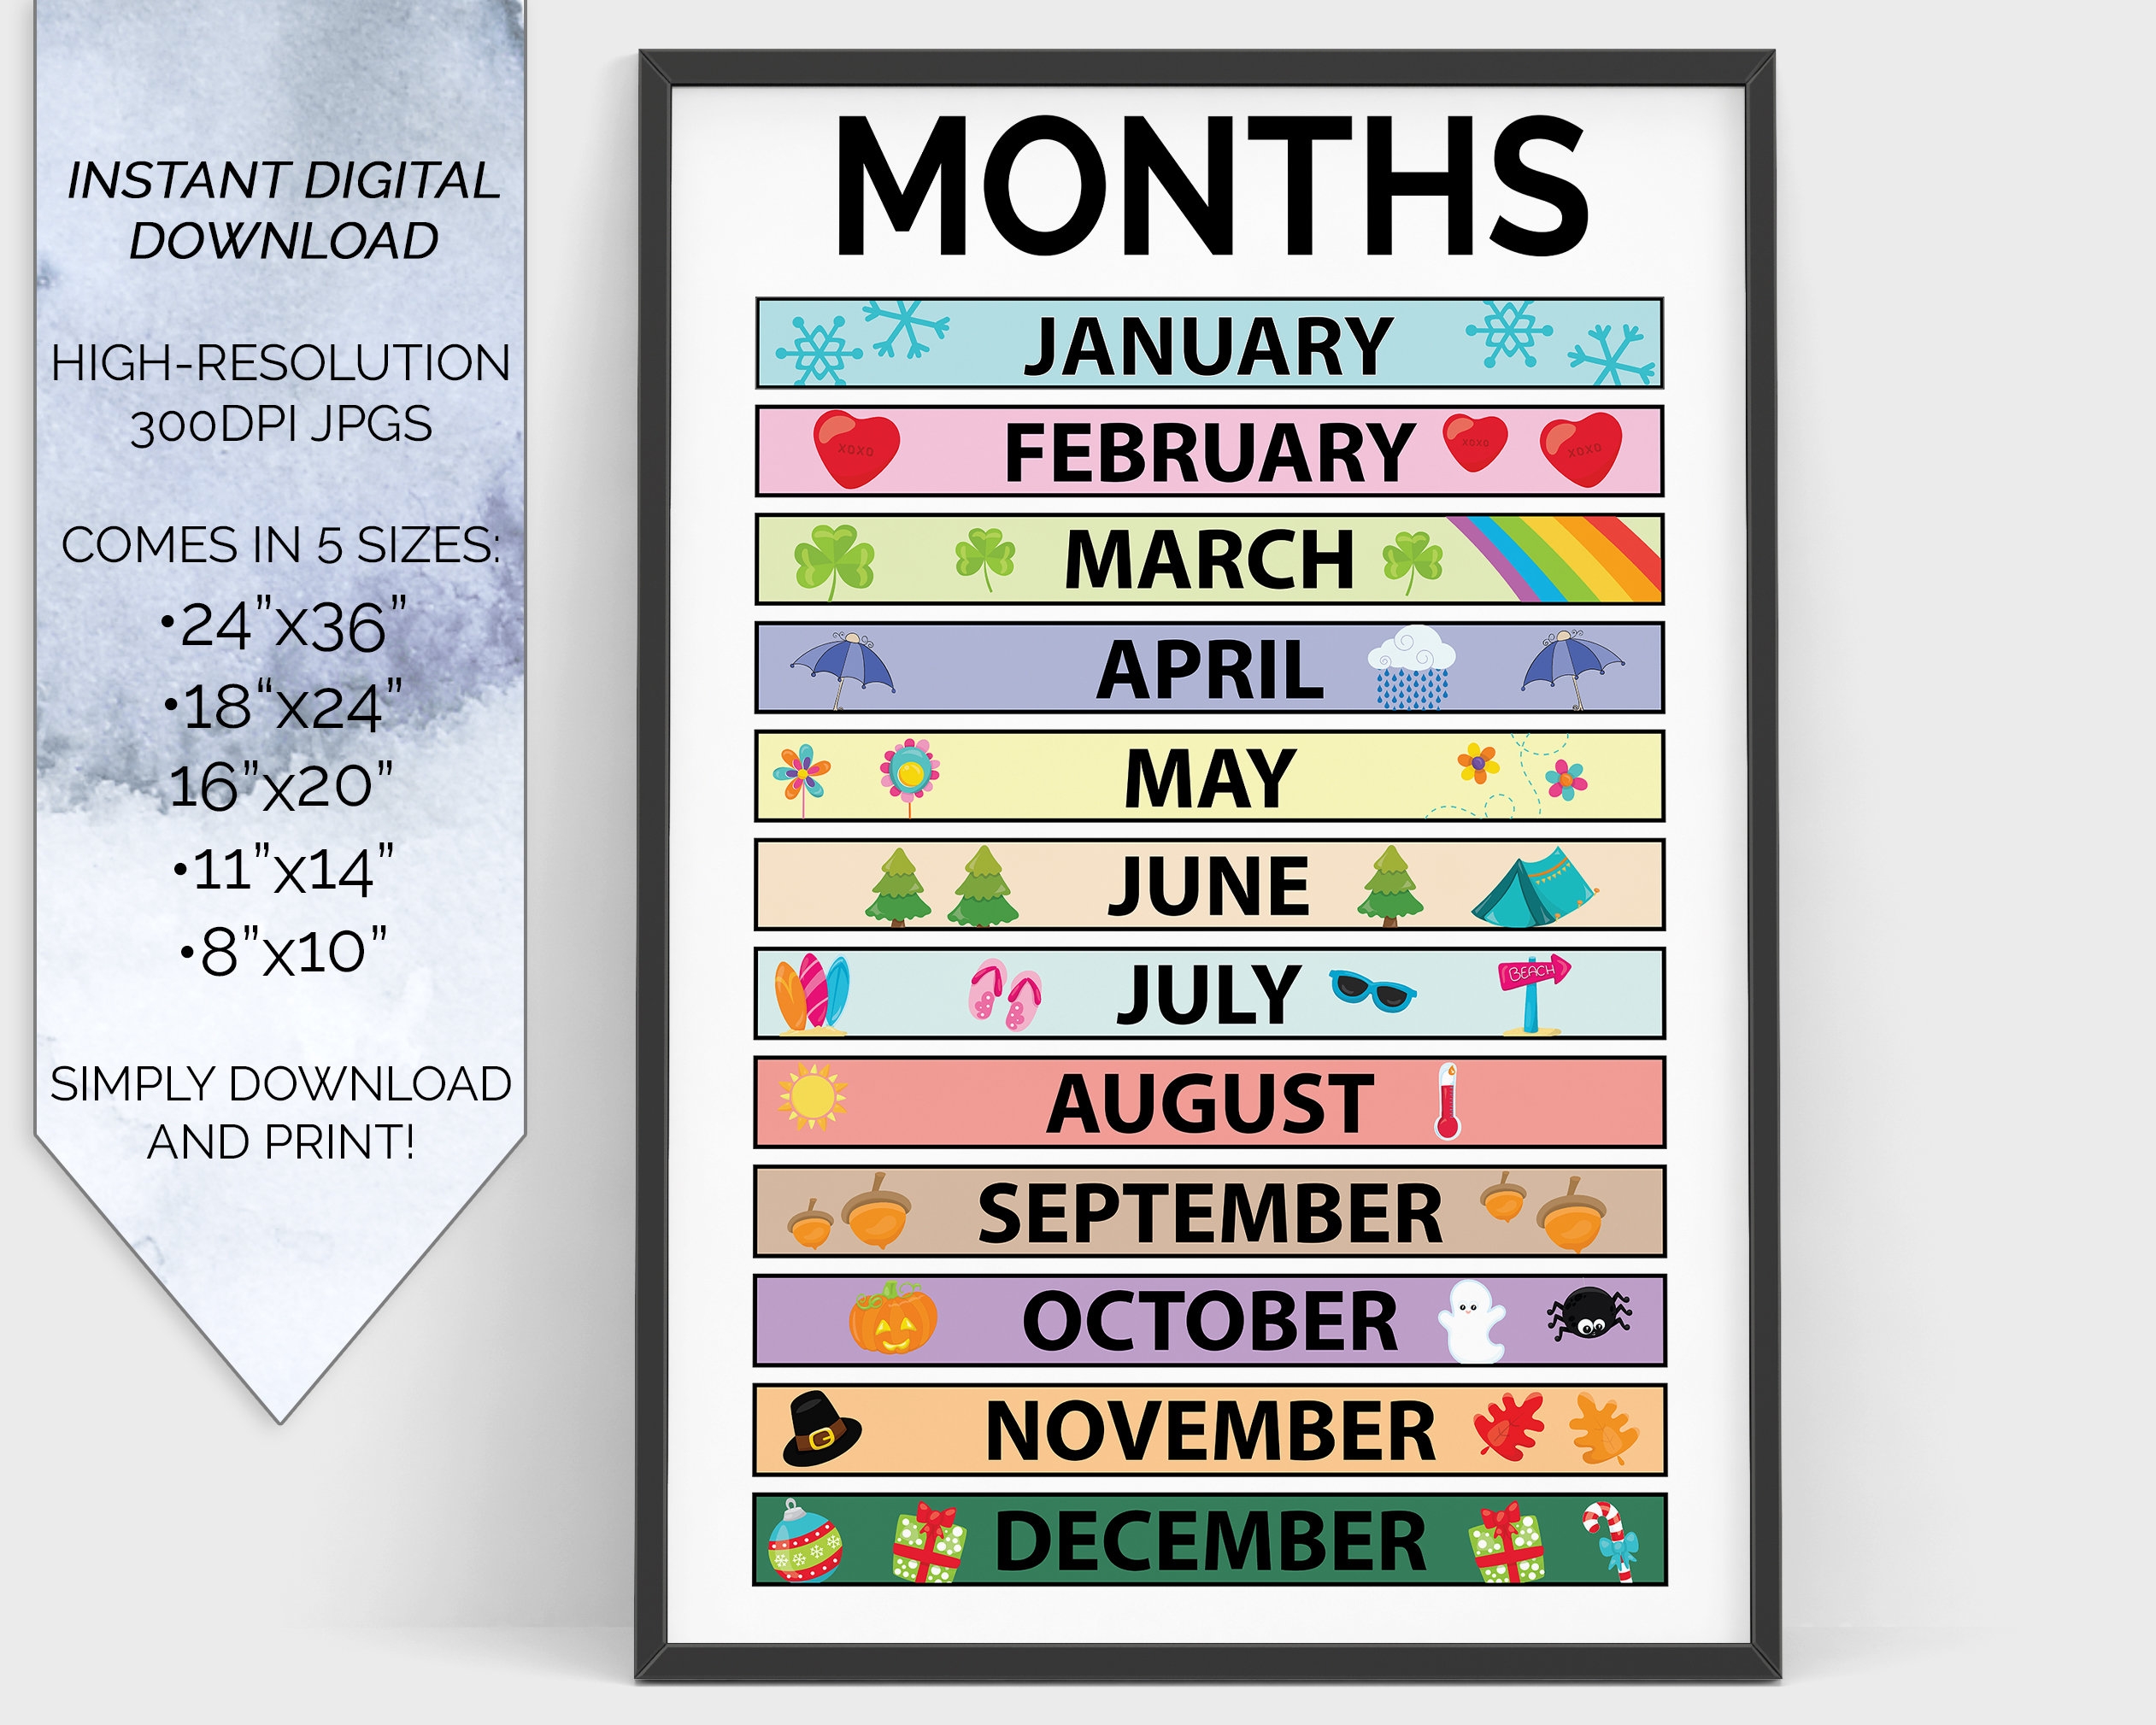 Months Of The Year Education Learning Chart Poster Printable Homeschool Virtual Learning Classroom Wall Poster Printable Elementary School Etsy